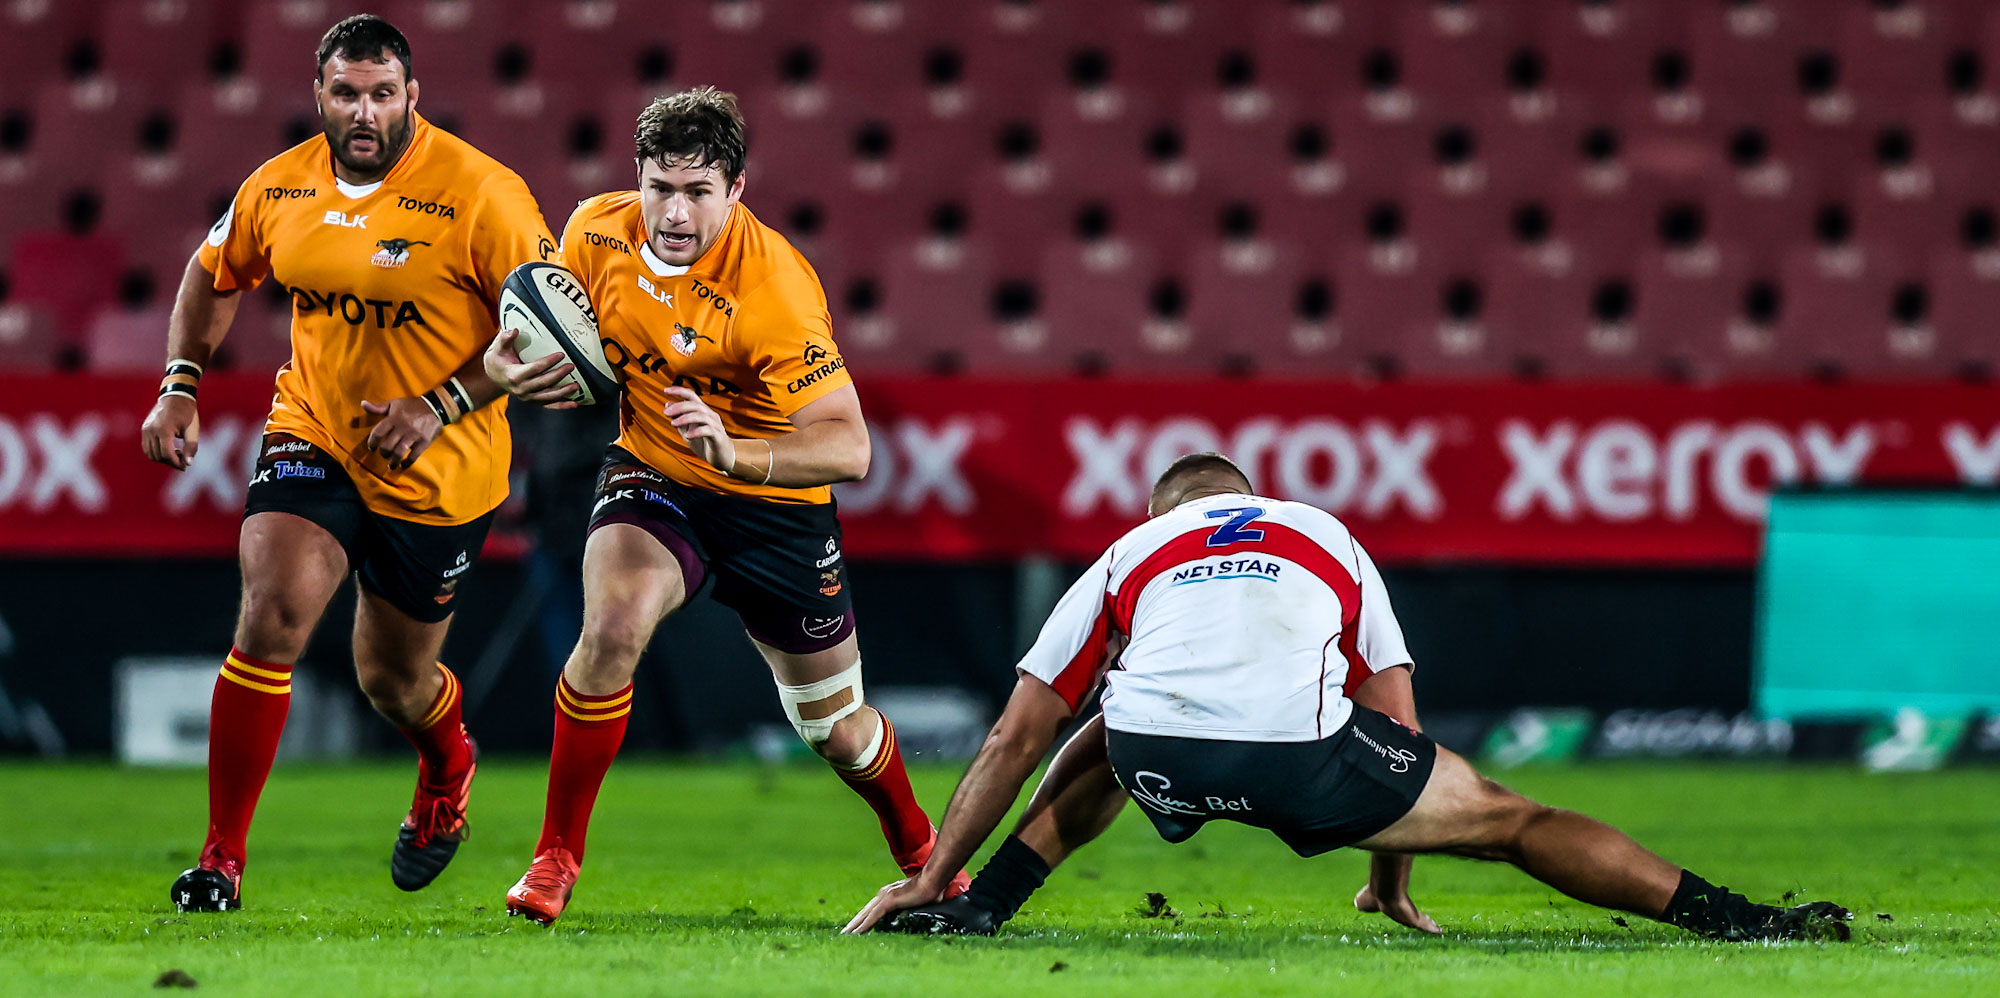 The Toyota Cheetahs showed a lot of resilience to beat the Sigma Lions in Johannesburg.